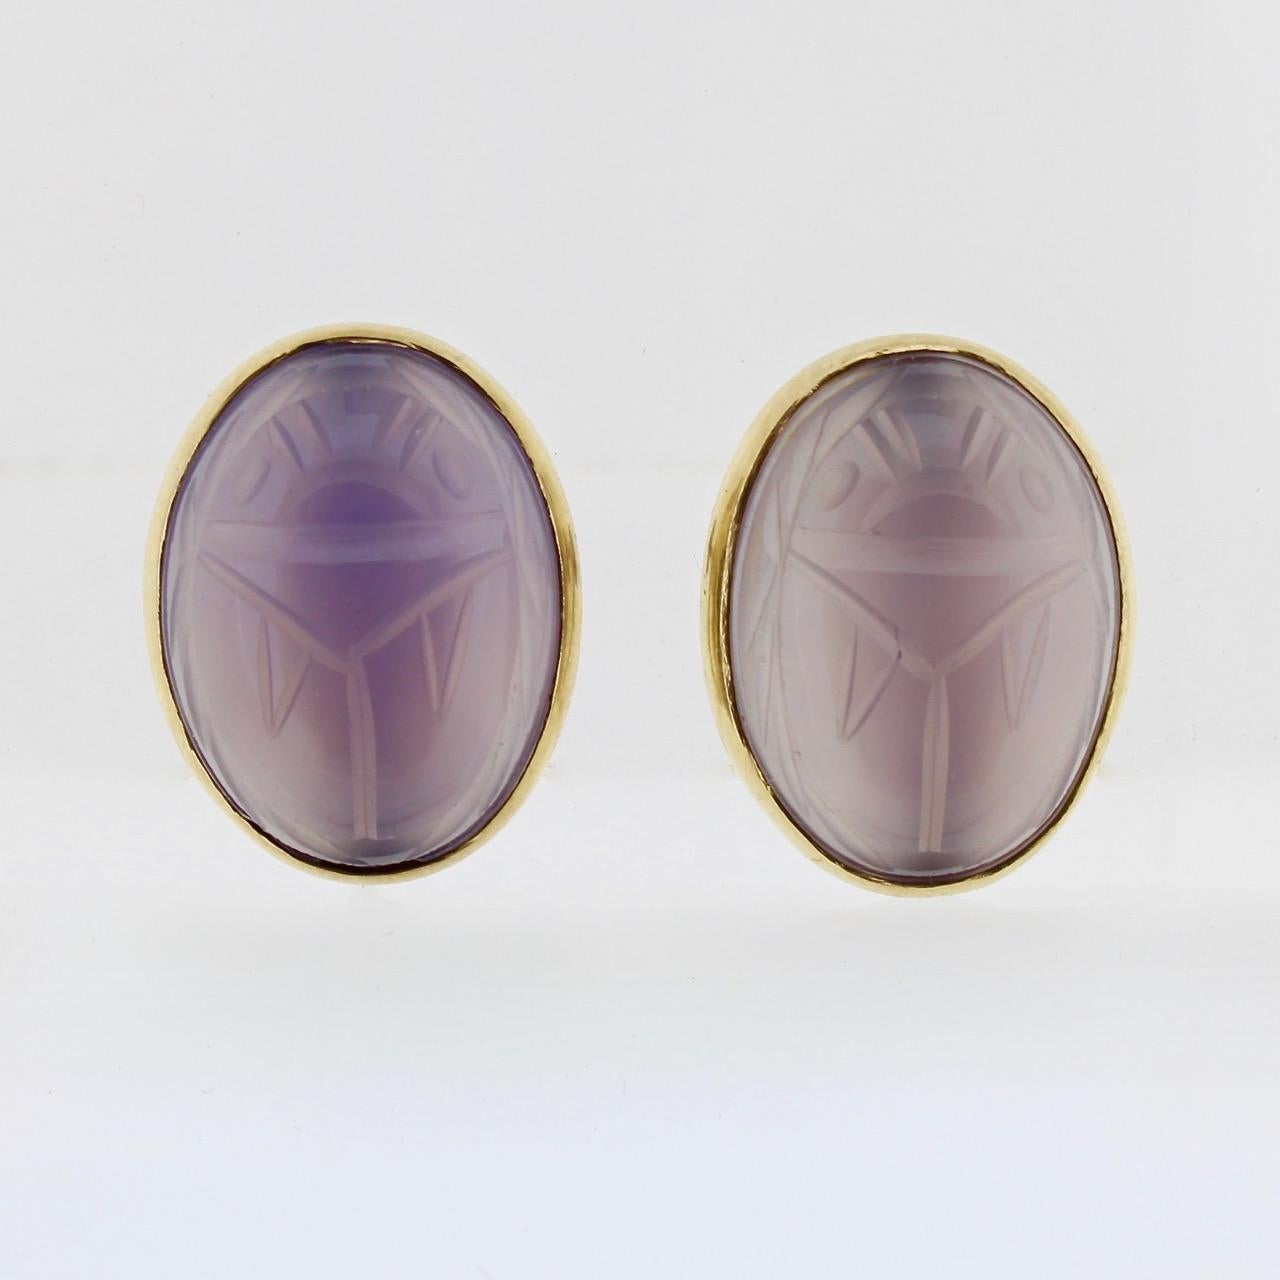 Details about   VTG Oval Gold Tone Pastel Enameled 1980's Screwback Earrings 